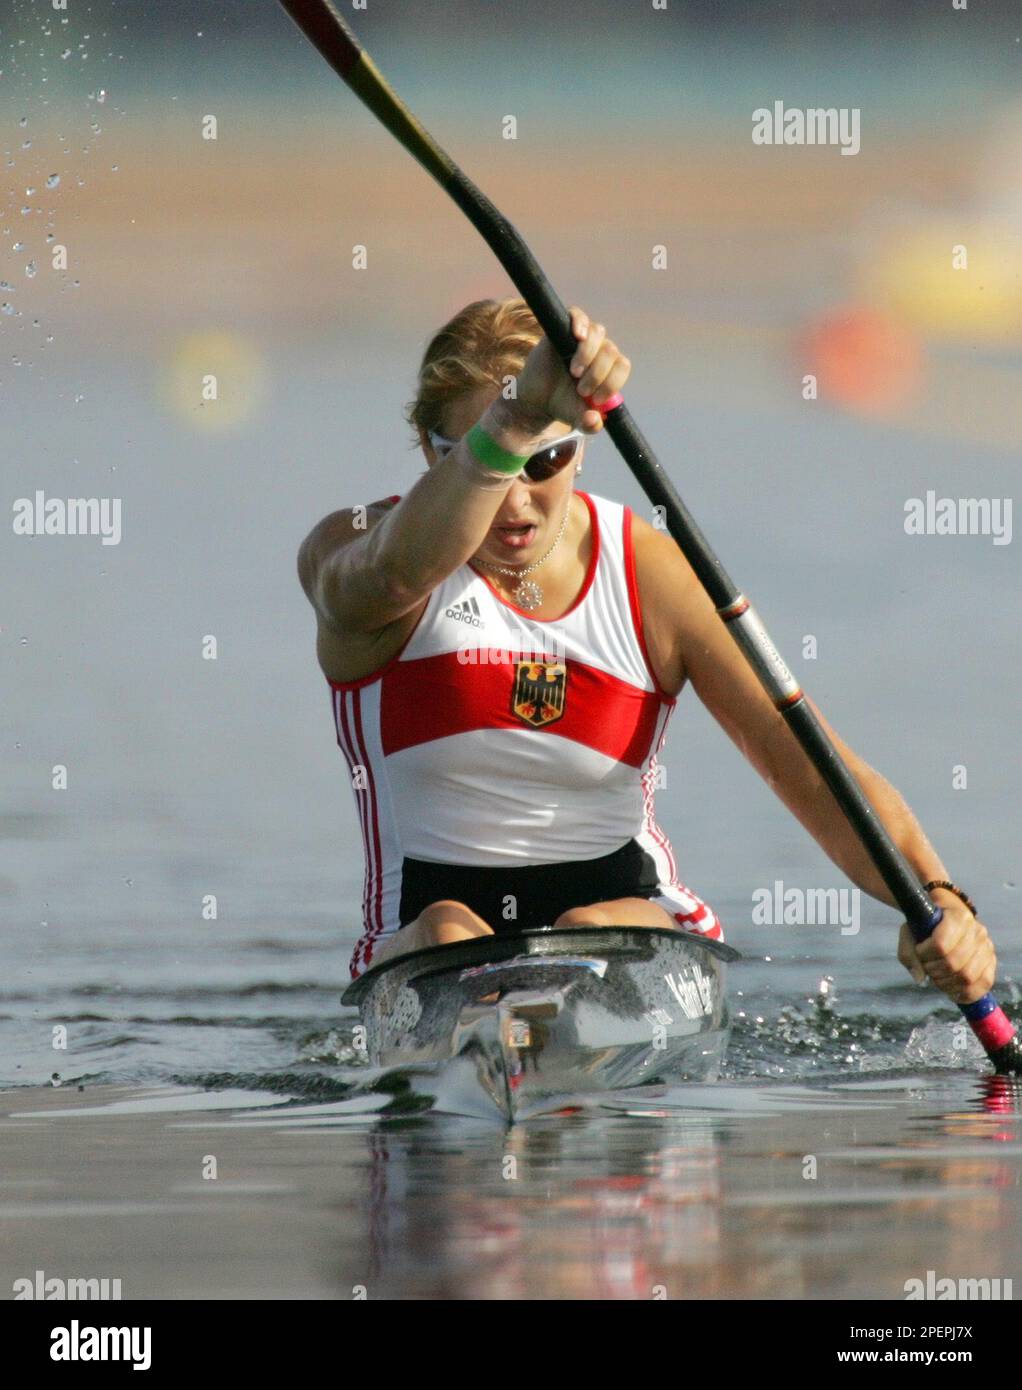 Katrin Wagner of Germany paddles to victory in her Women's K1 500 meter  semifinal, during the kayak flatwater event at the 2004 Olympic Games in  Schinias near Athens, Greece, Thursday, Aug. 26,